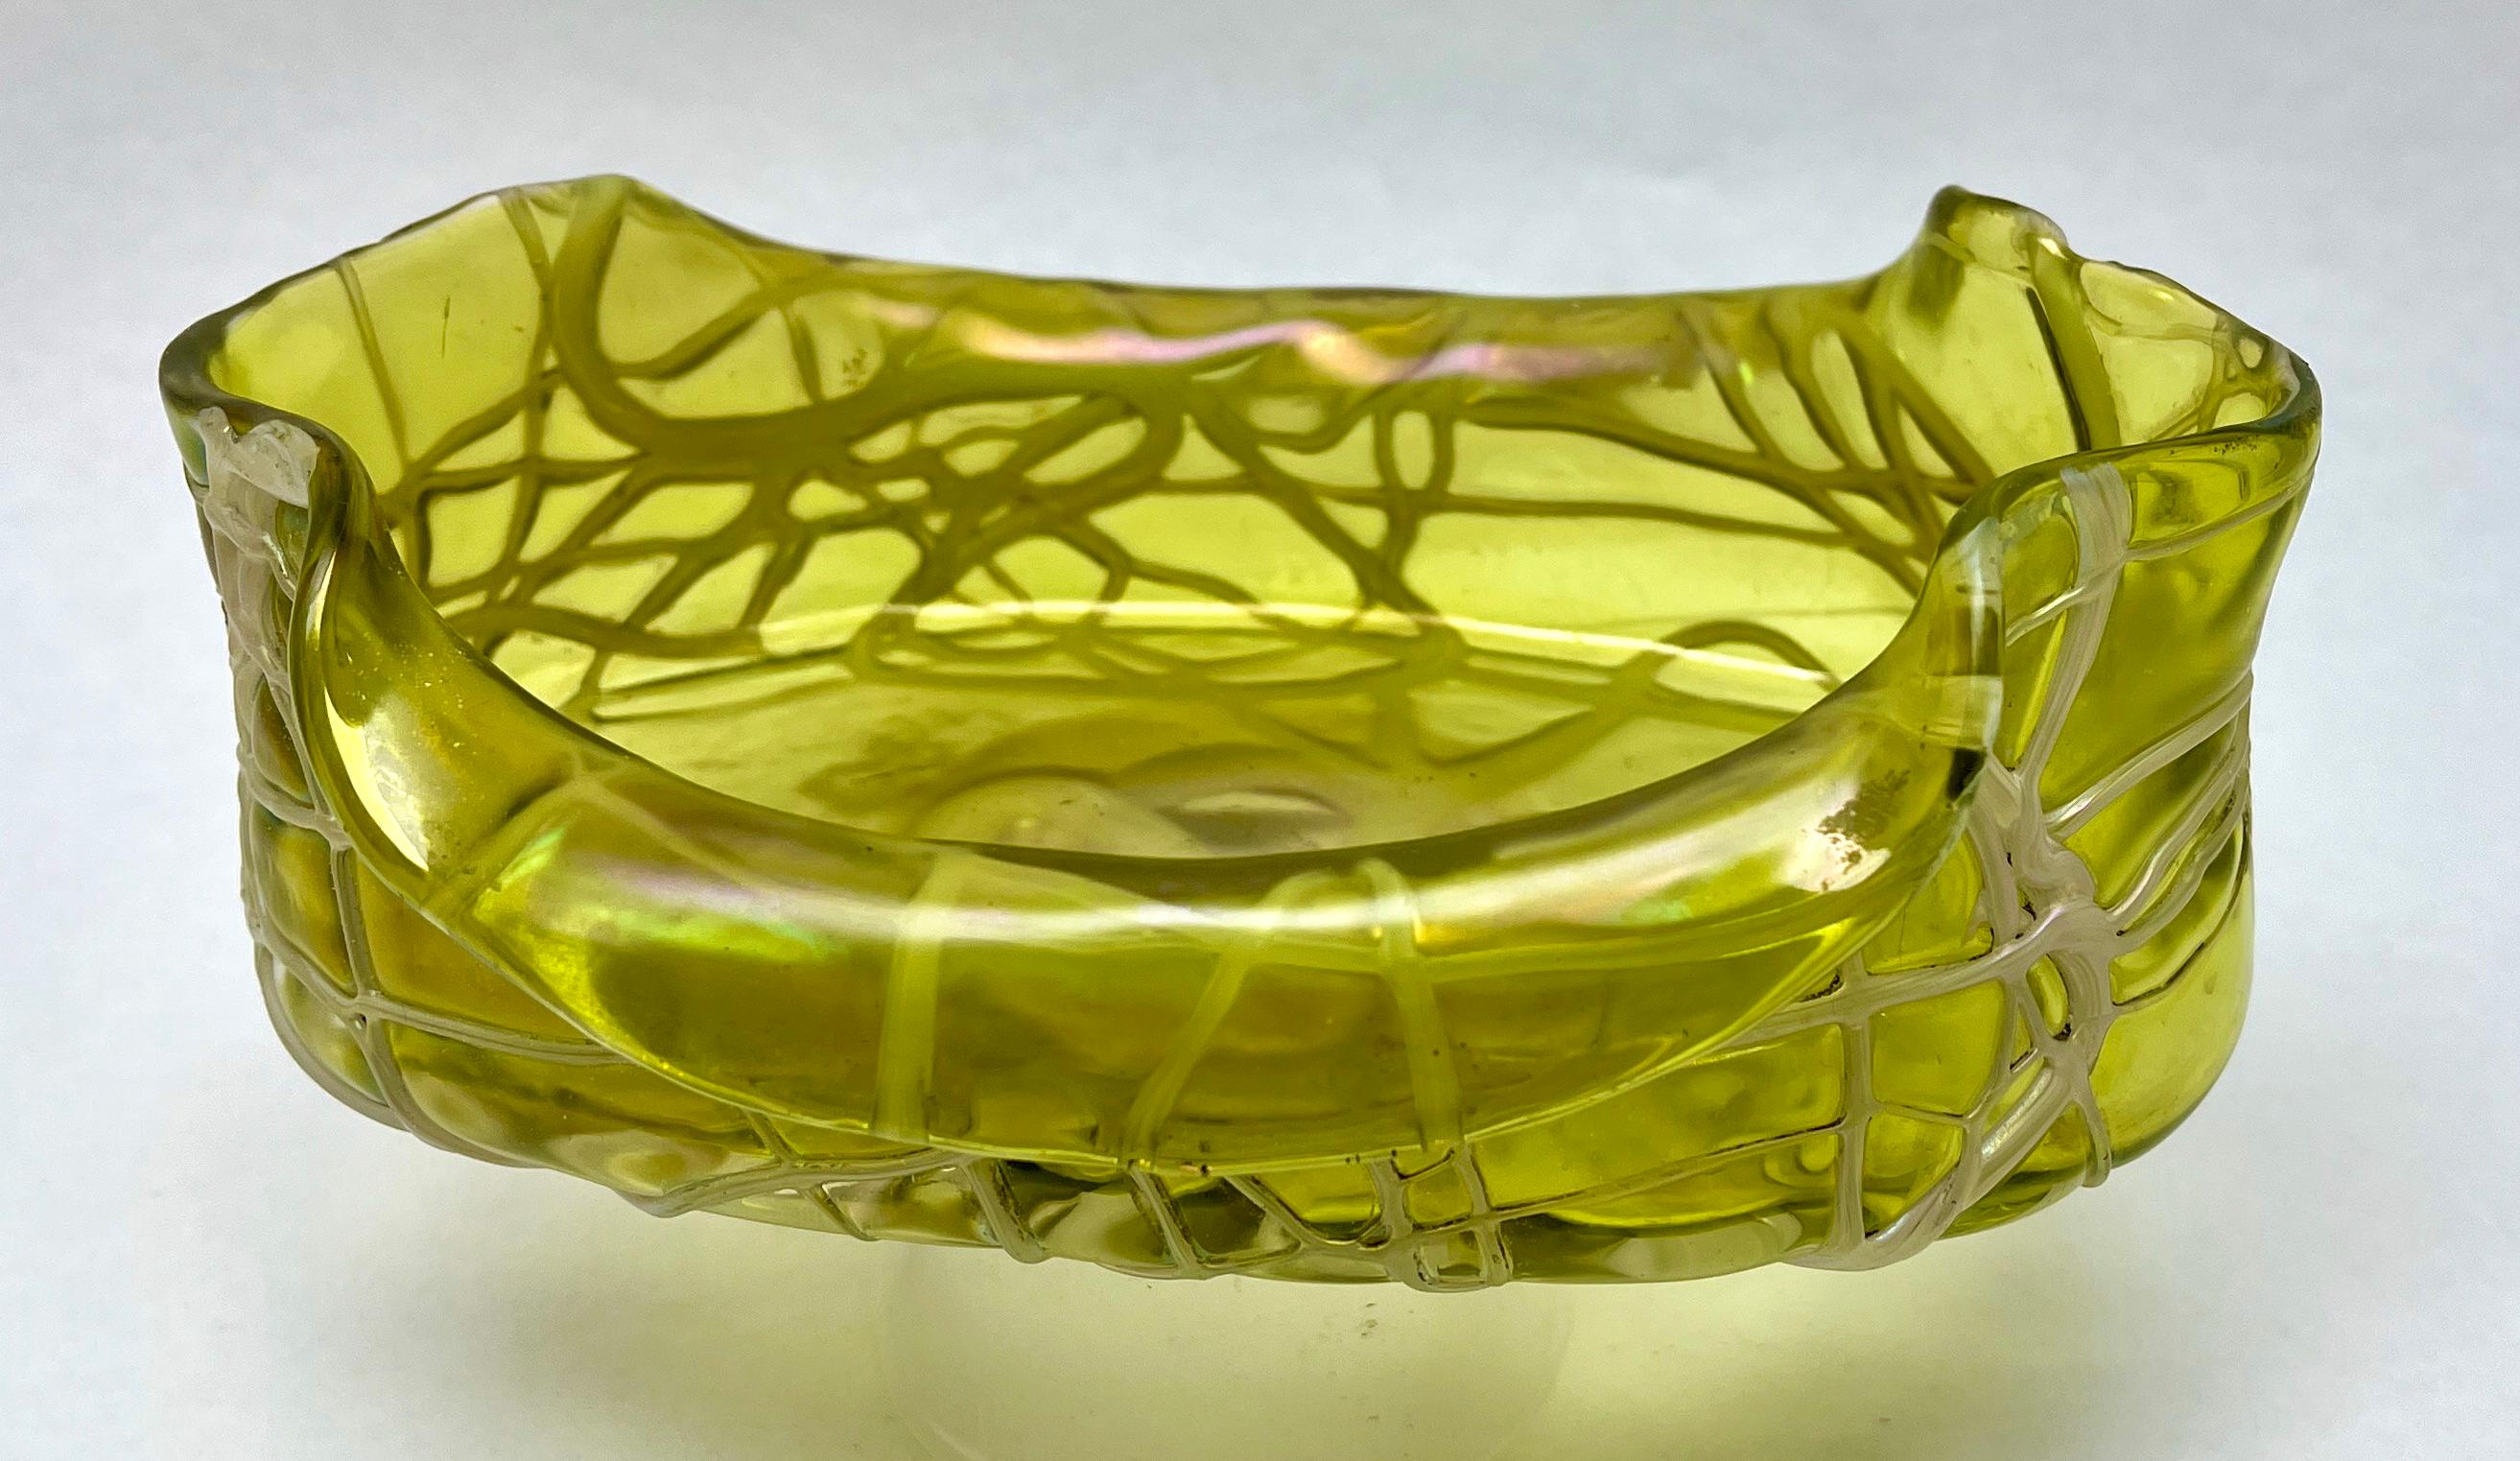 French Loetz Art Nouveau Vide Poch Whit Details of Irradiated Glass, 1900s For Sale